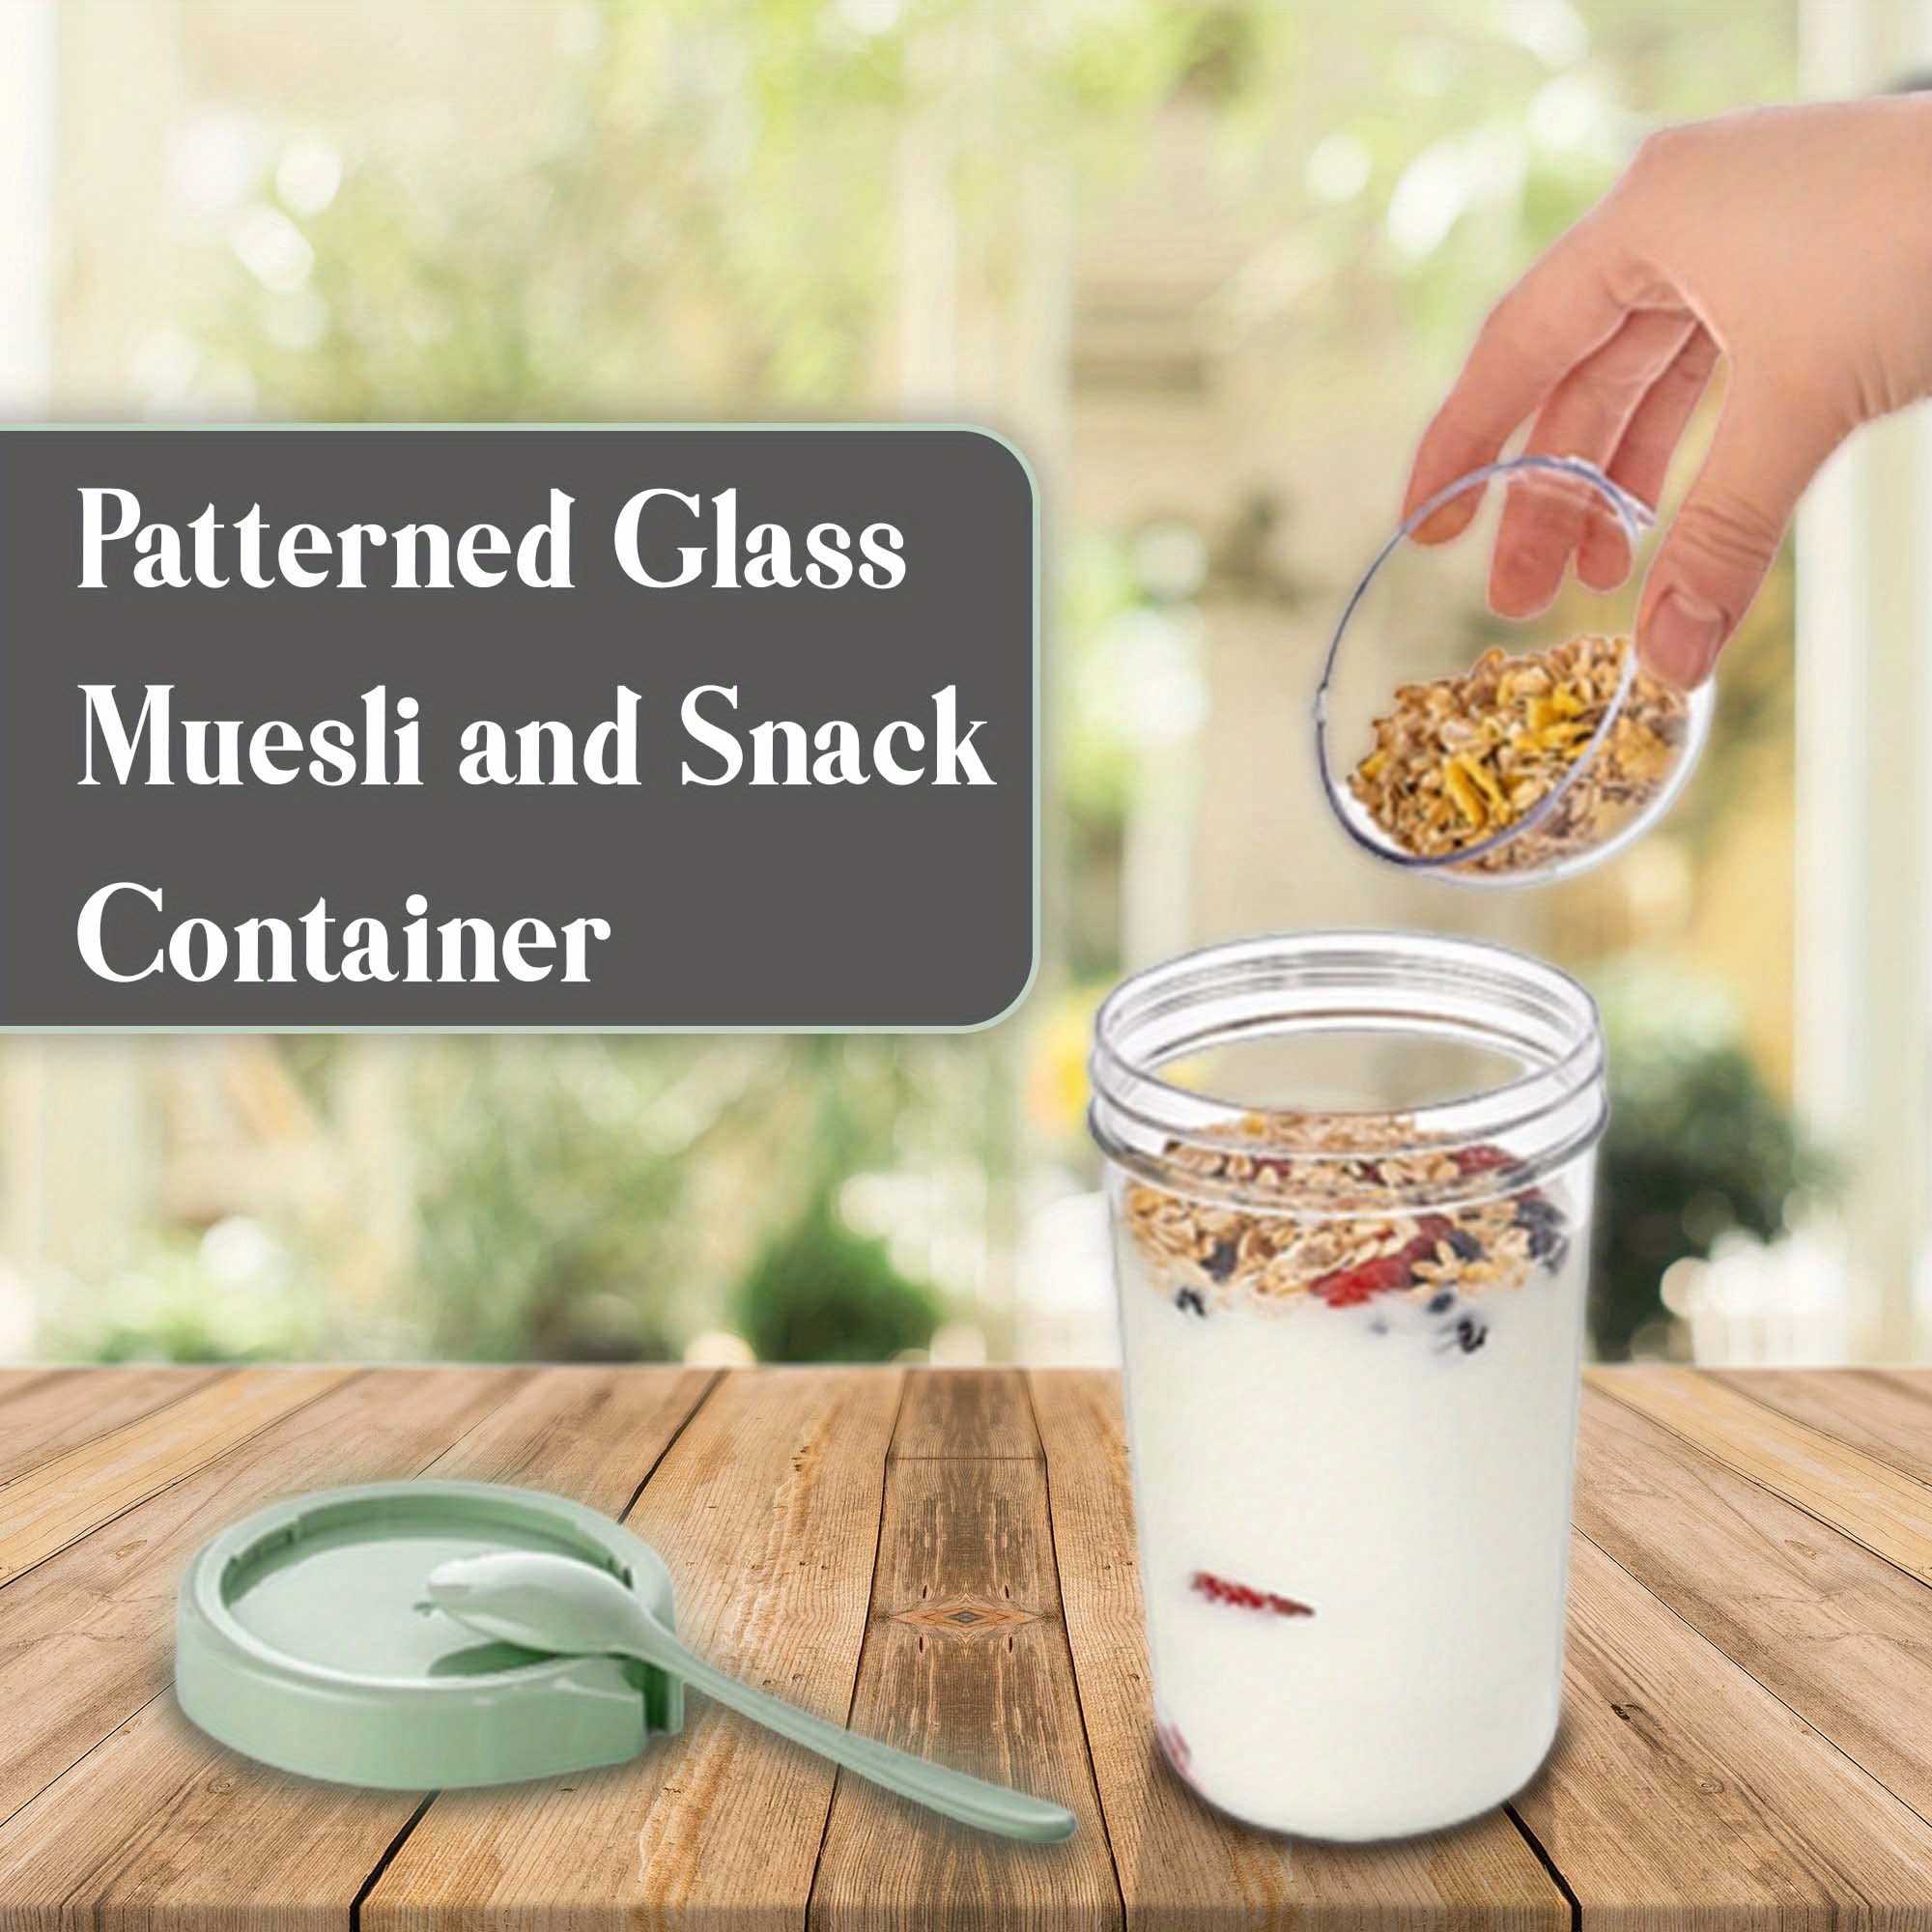 Salad Cup, Breakfast Cup, Yogurt Cup With Top, Cereal Or Oatmeal Container,  Vegetable And Fruit Salad Cup With Spoon And Salad Dressing Holder, Home  Fresh Salad Dressing Container, Portable Cup, Essential Mini